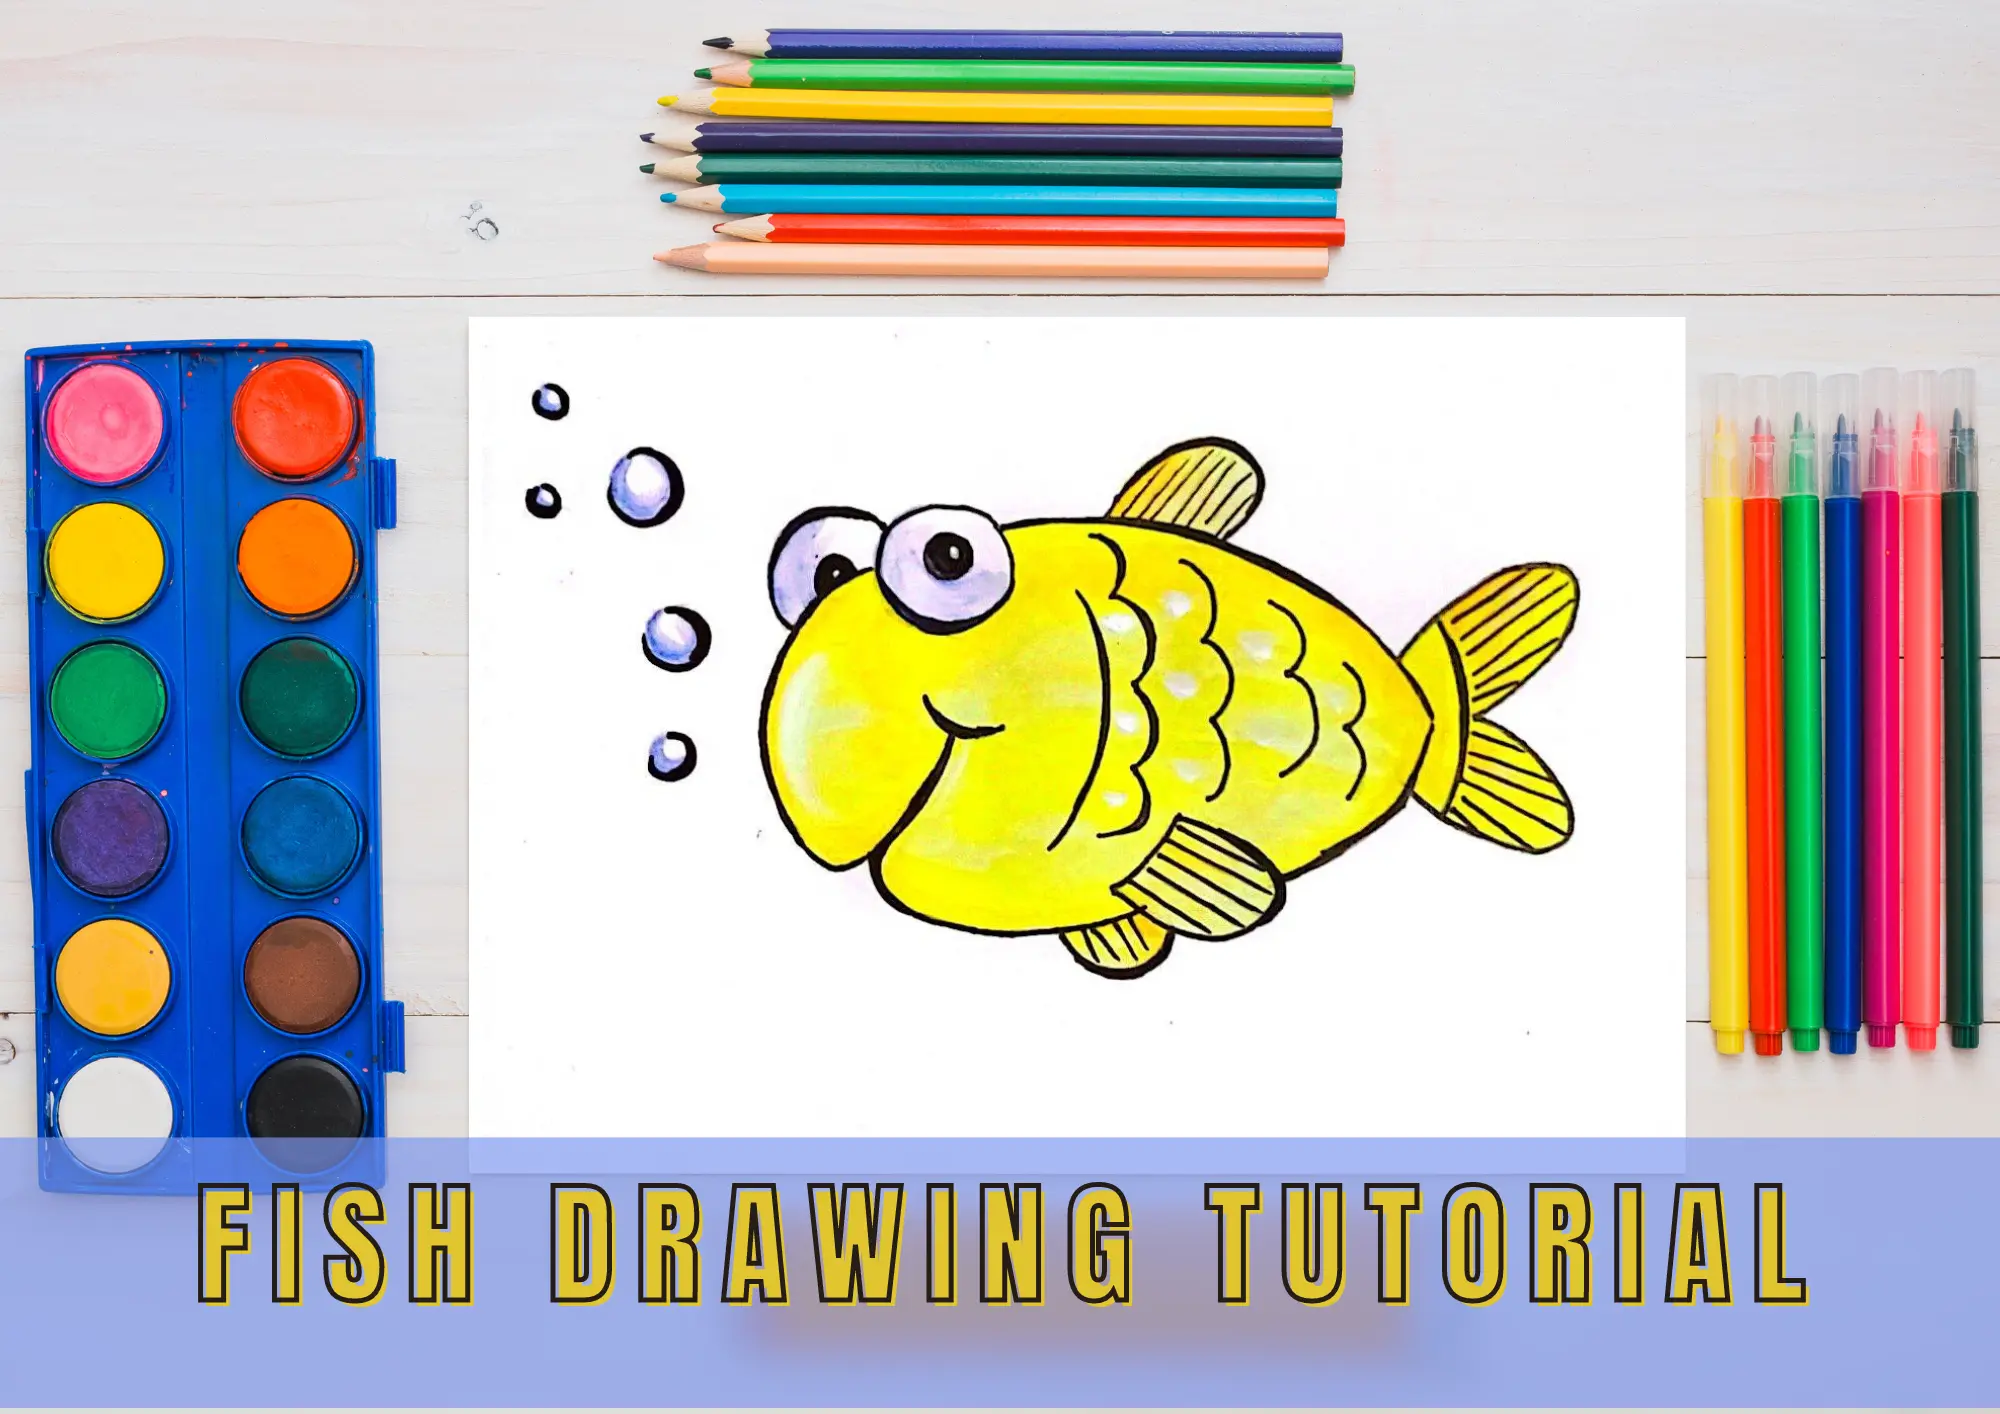 How To Draw a Fish - EASY Drawing Tutorial!